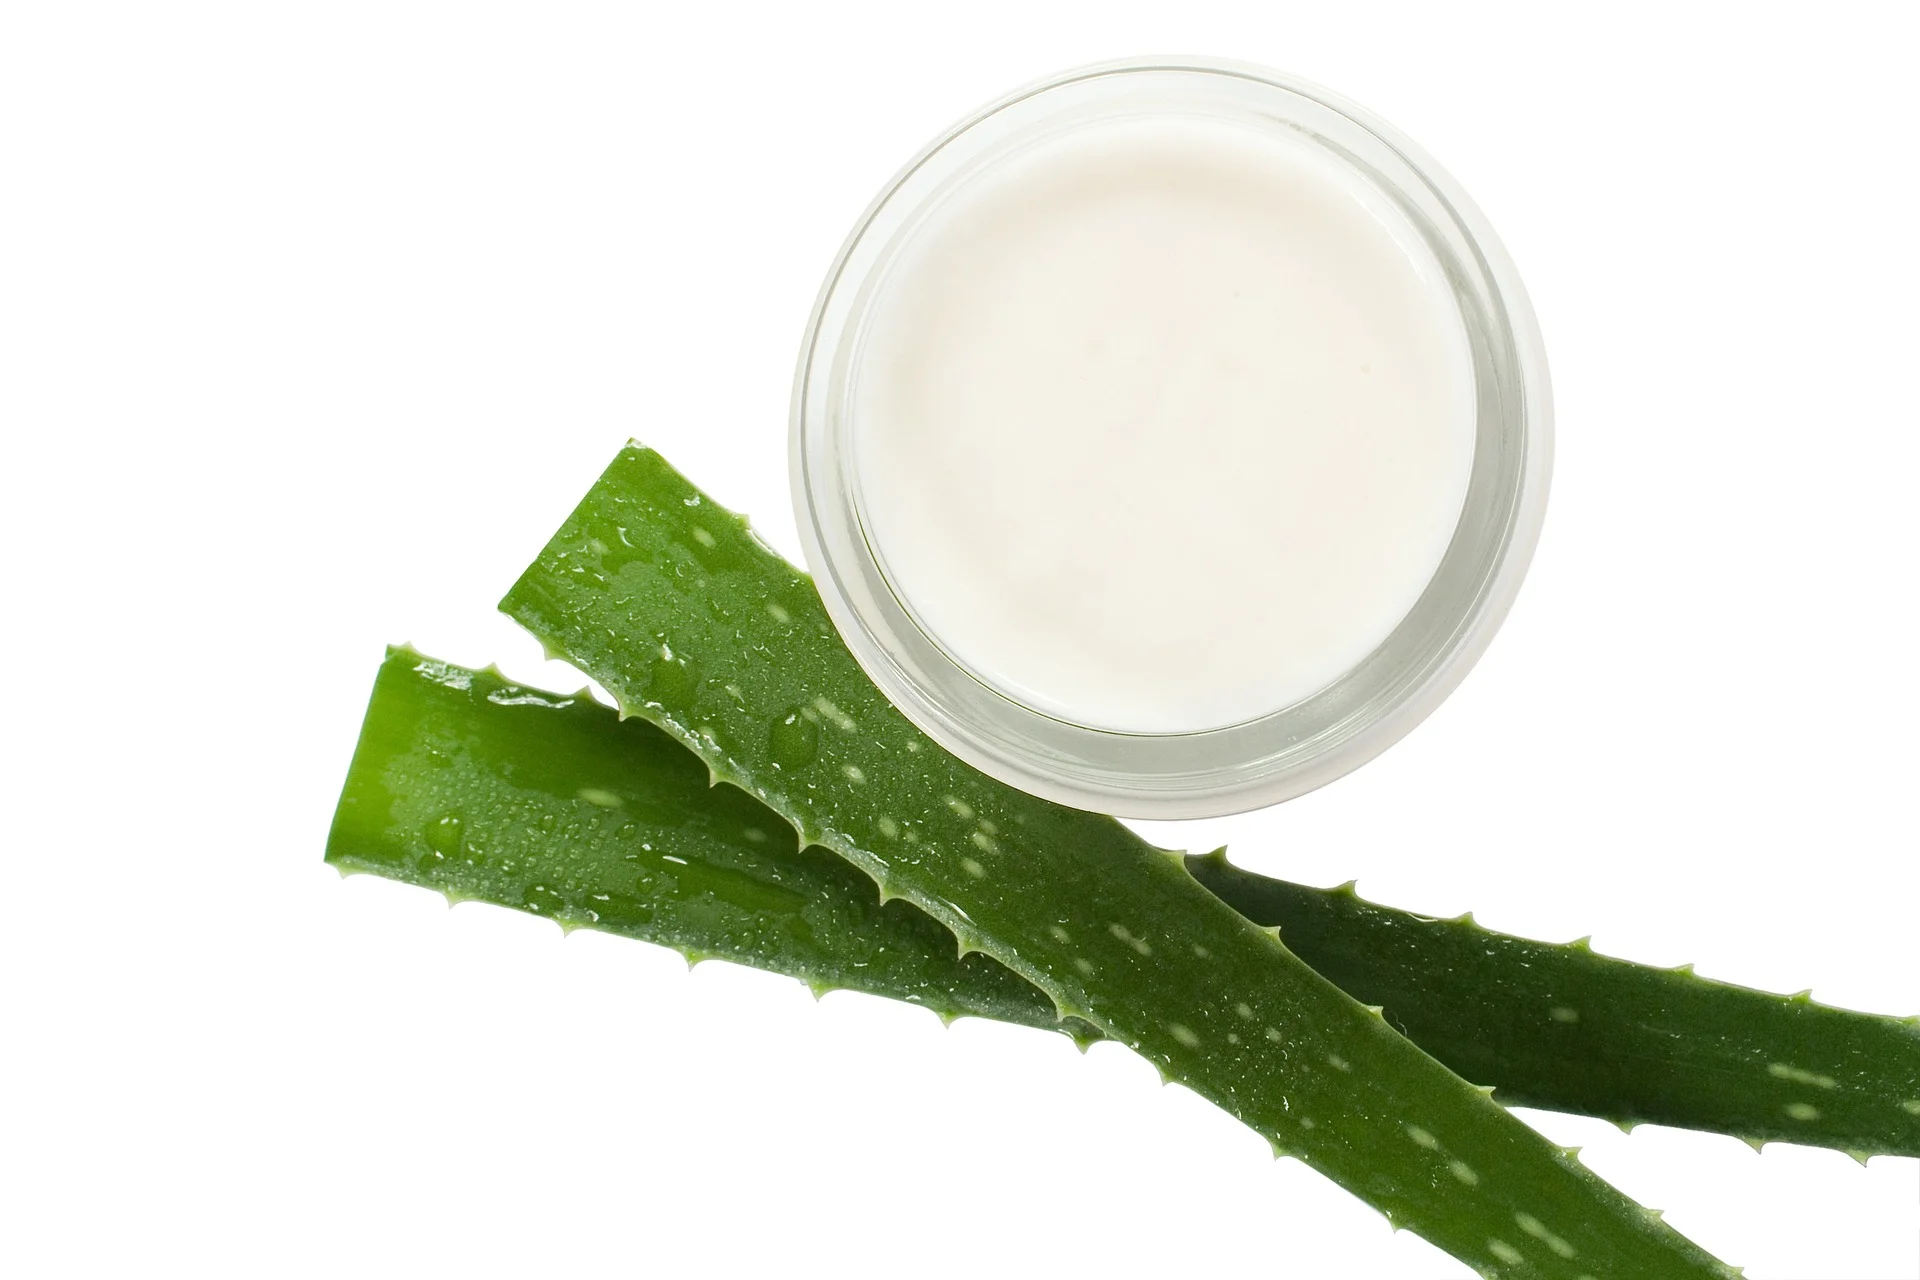 Tea Tree Oil And Aloe Vera for acne and pimples